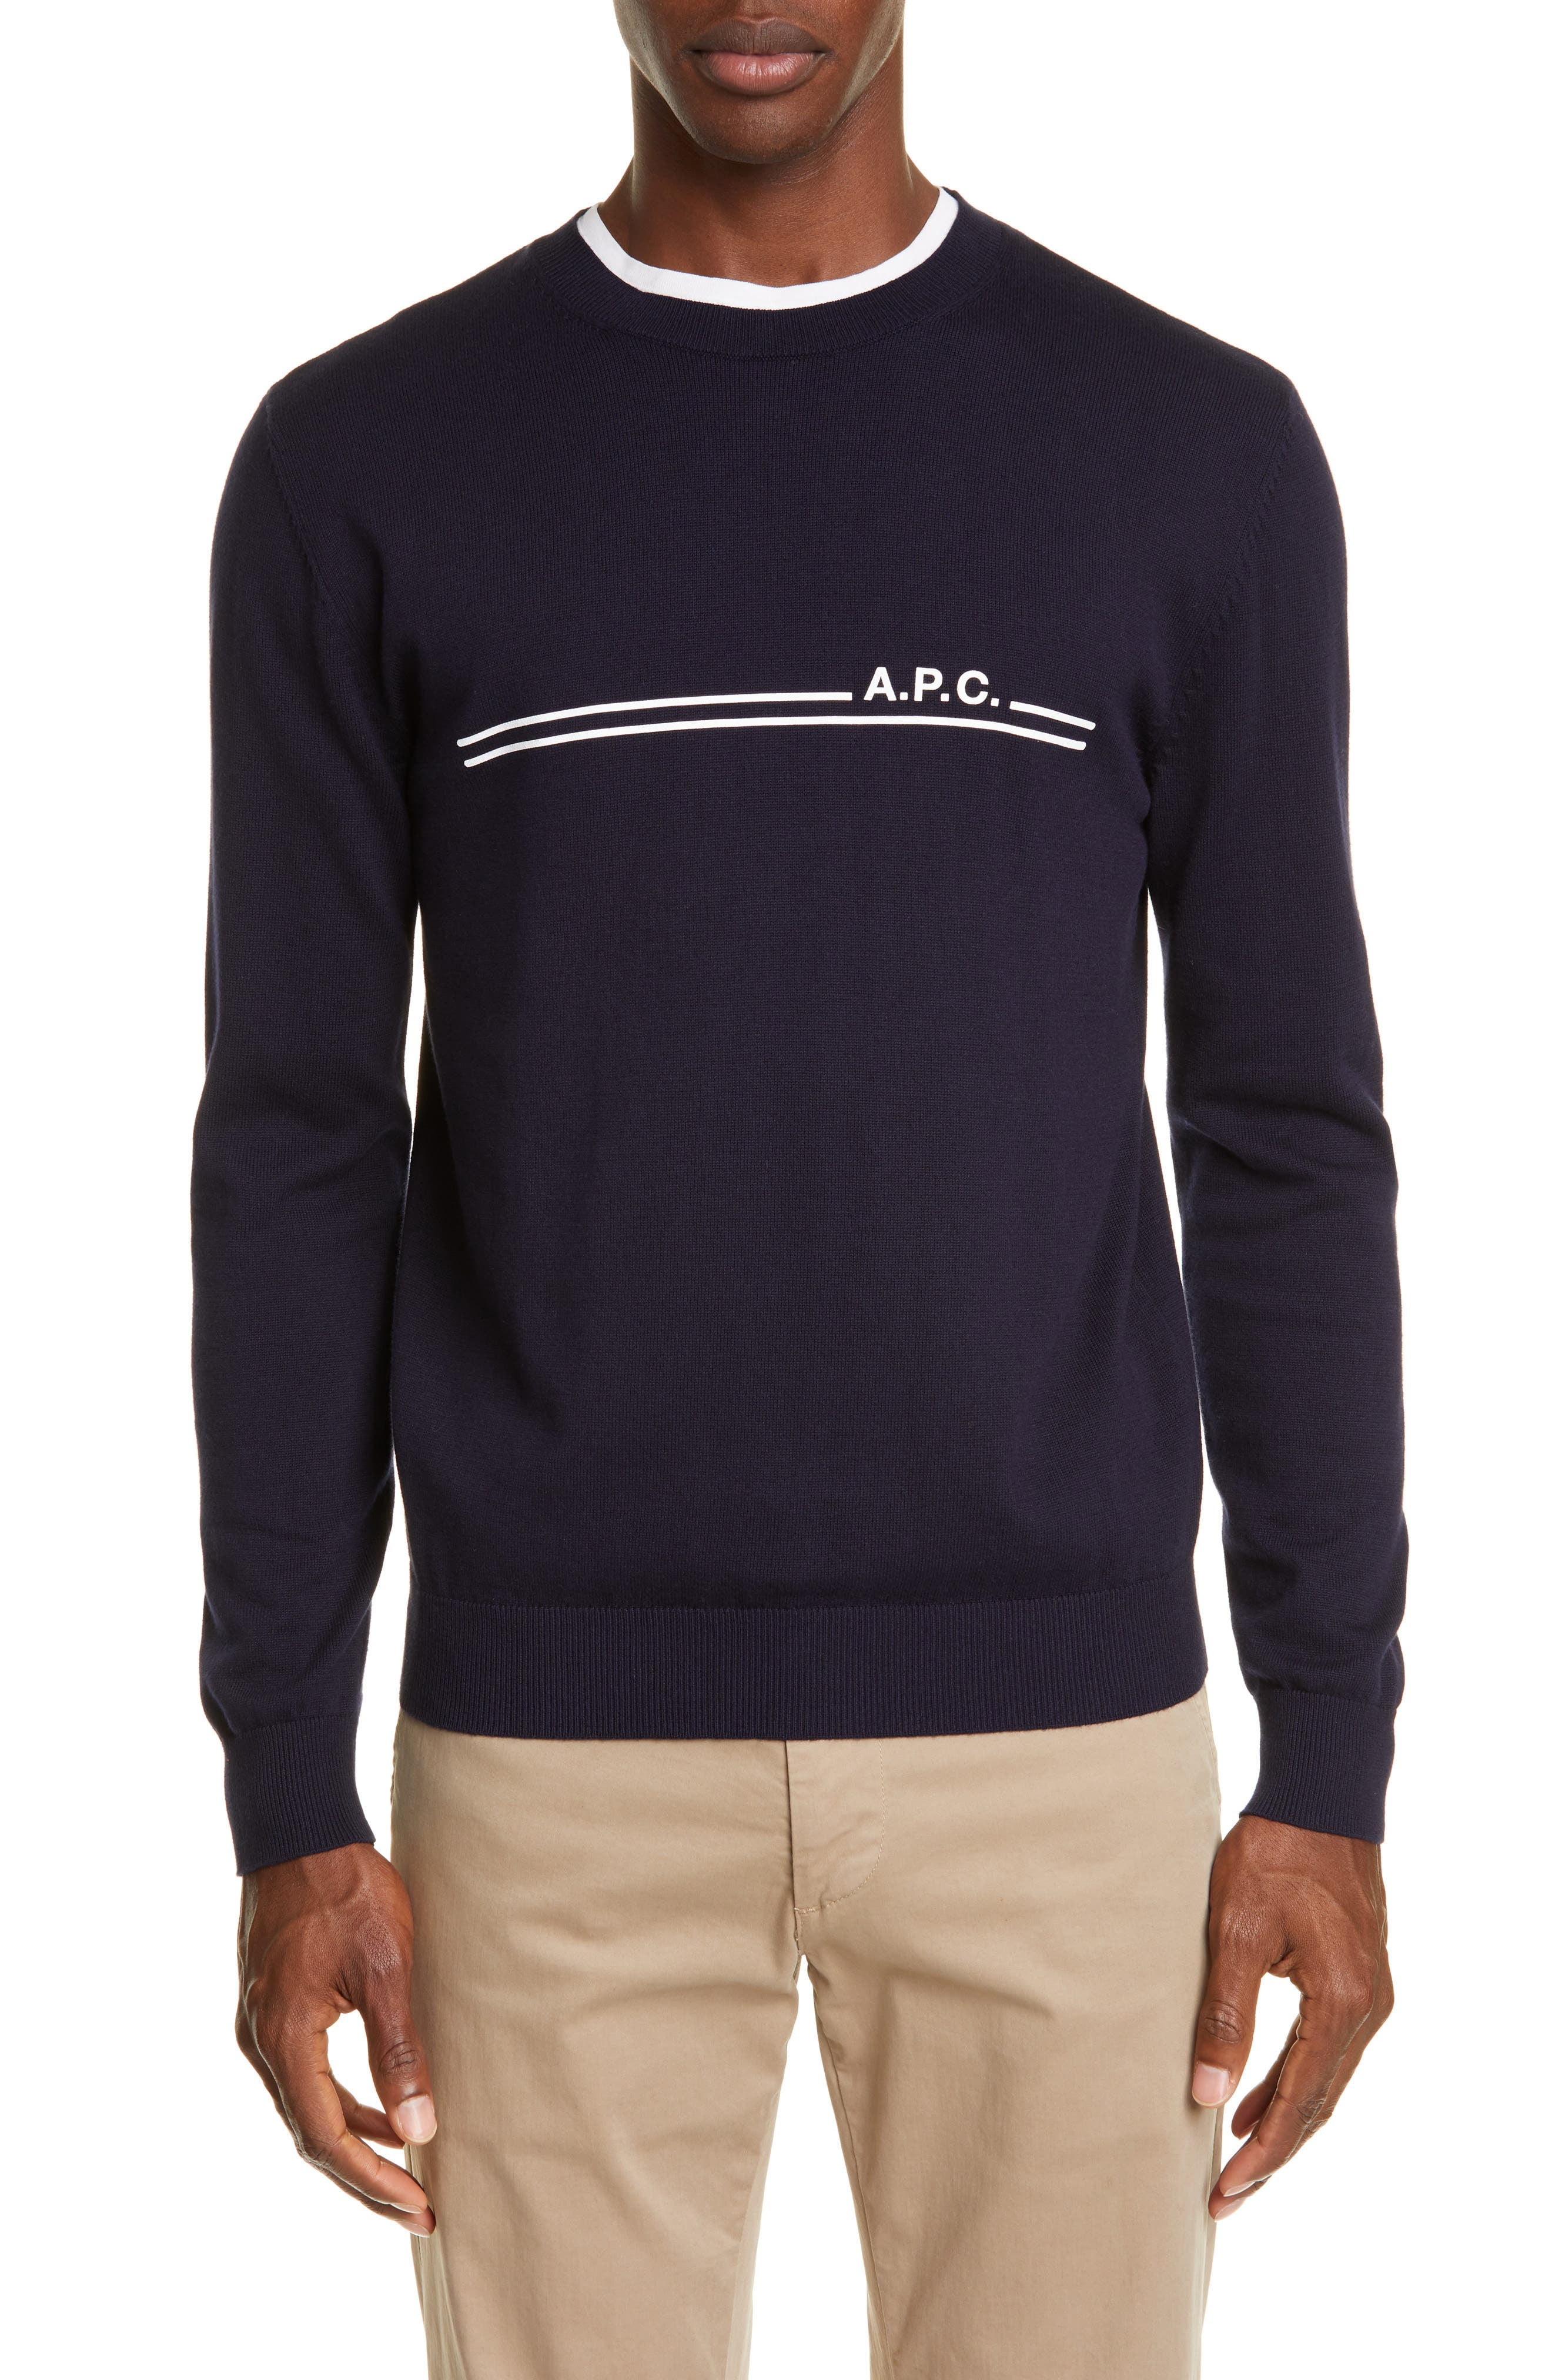 A.P.C. NAVY Eponyme Thin Knitwear Sweater, US Small